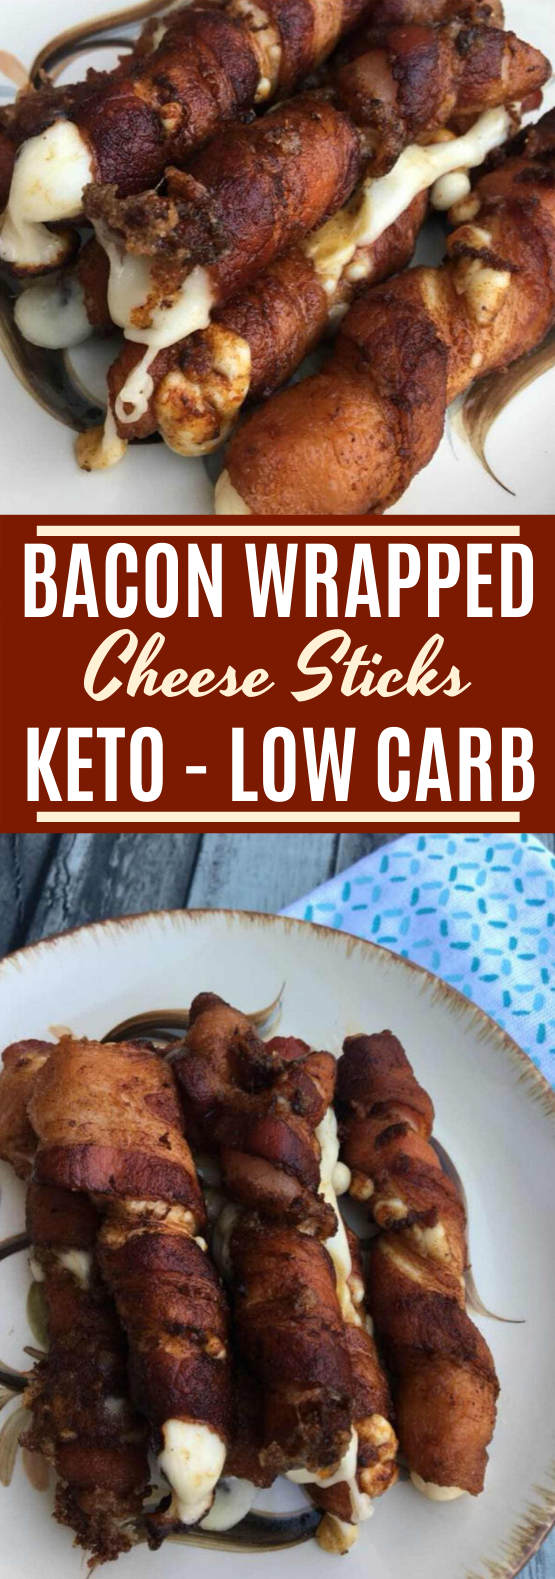 Bacon Wrapped Cheese Sticks #keto #snacks #appetizers #glutenfree #lowcarb